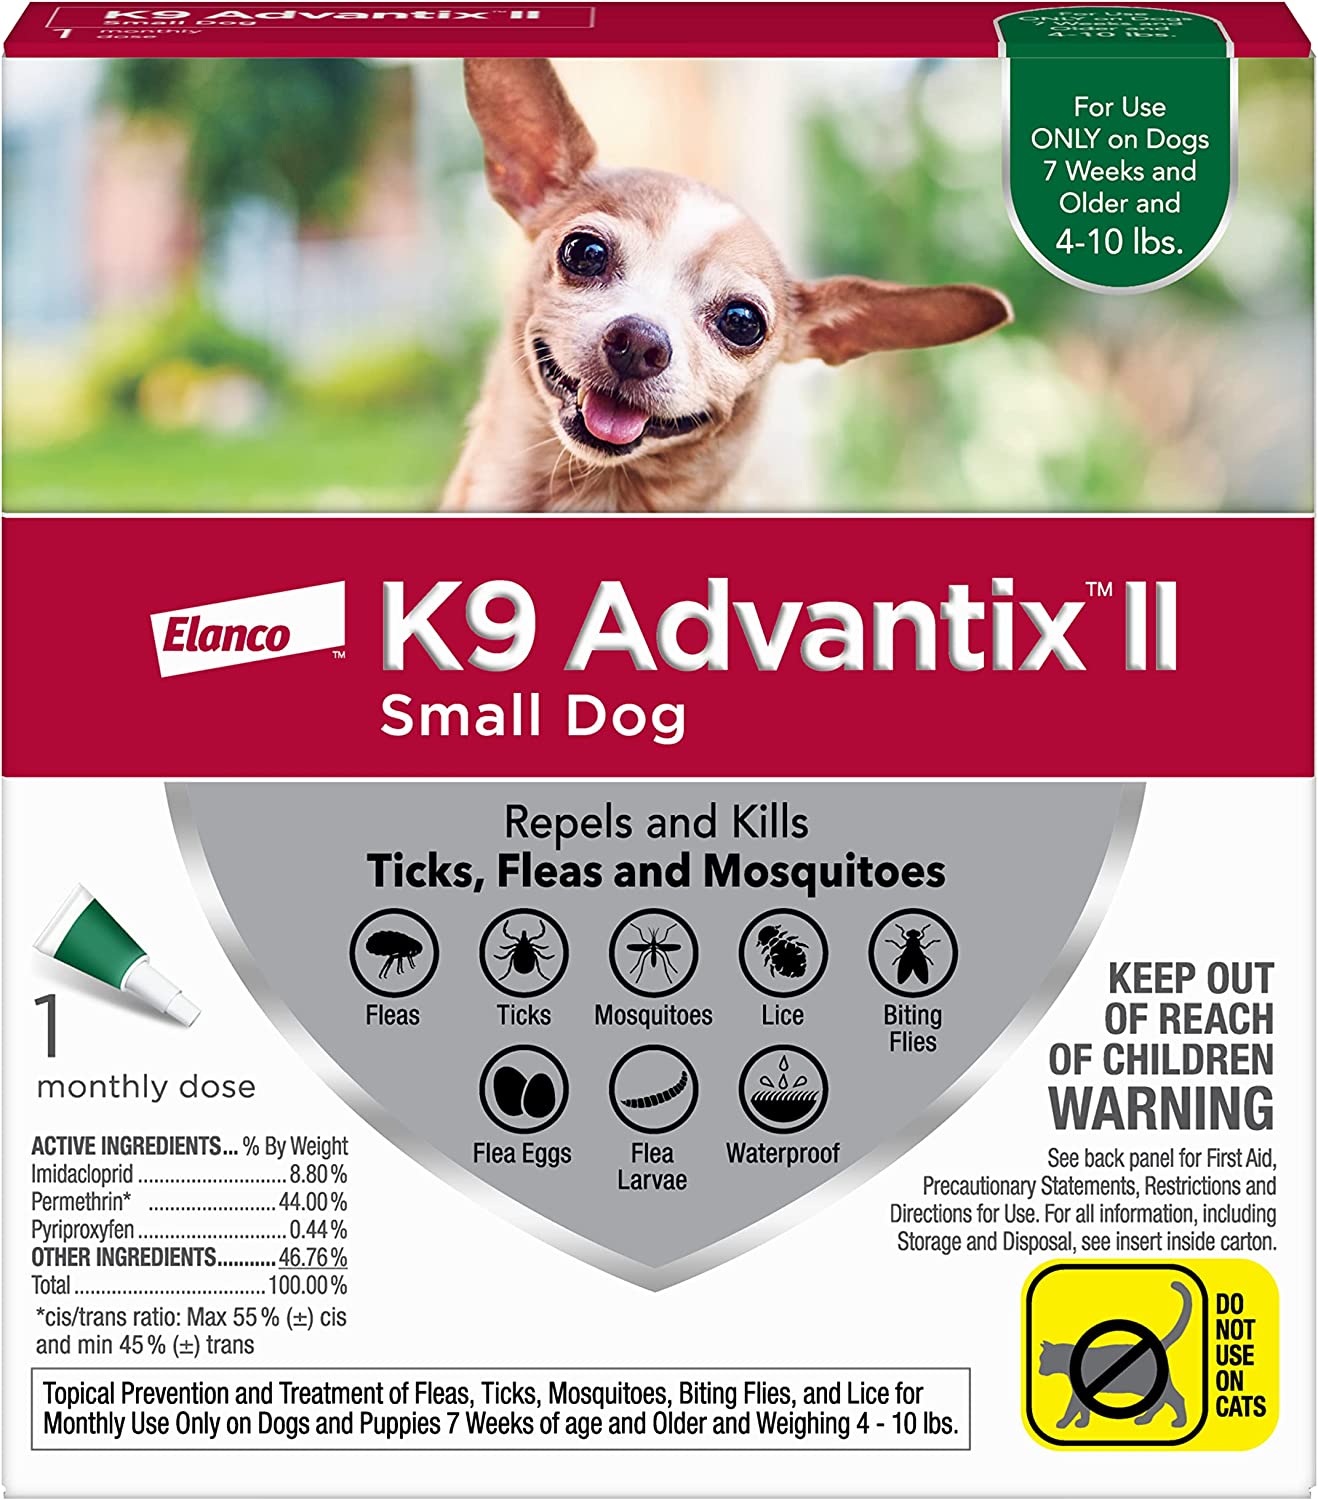 Bayer K9 Advantix II for Small Dog Only, Repels & Kills Ticks & Fleas, 7 weeks & older 4-10 lbs, 1 monthly dose